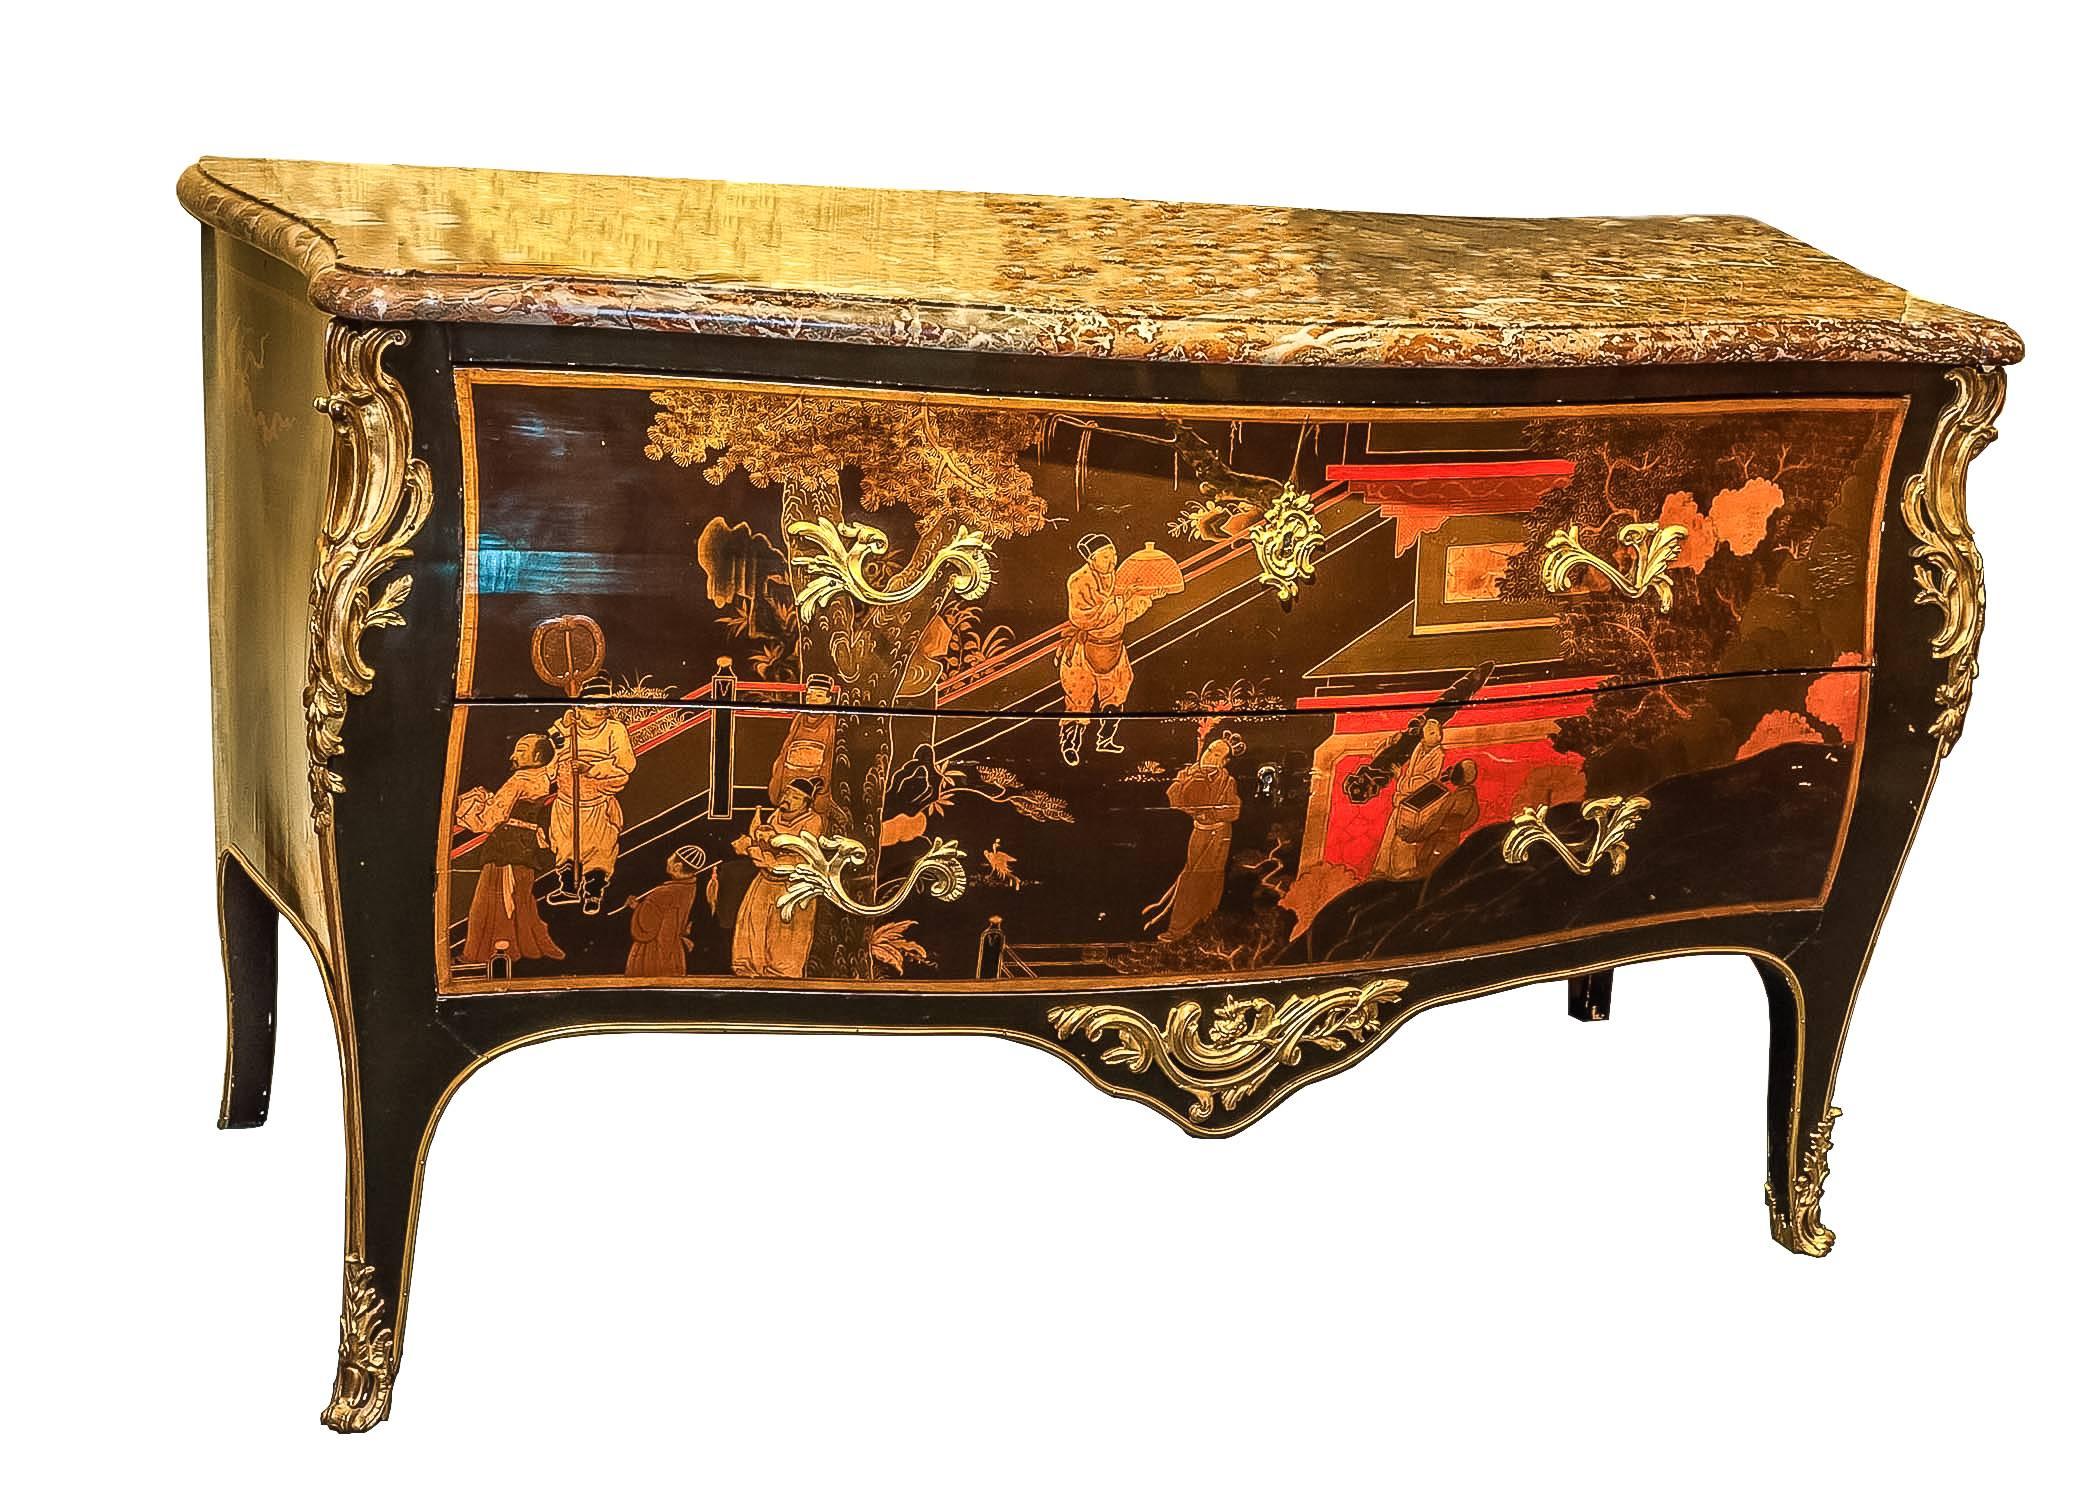 A chinoiserie Louis XV style marble-top commode by Joseph Pierre Francois Jeanselme.  Stamped: Jeanselme.  Stock number: F19.